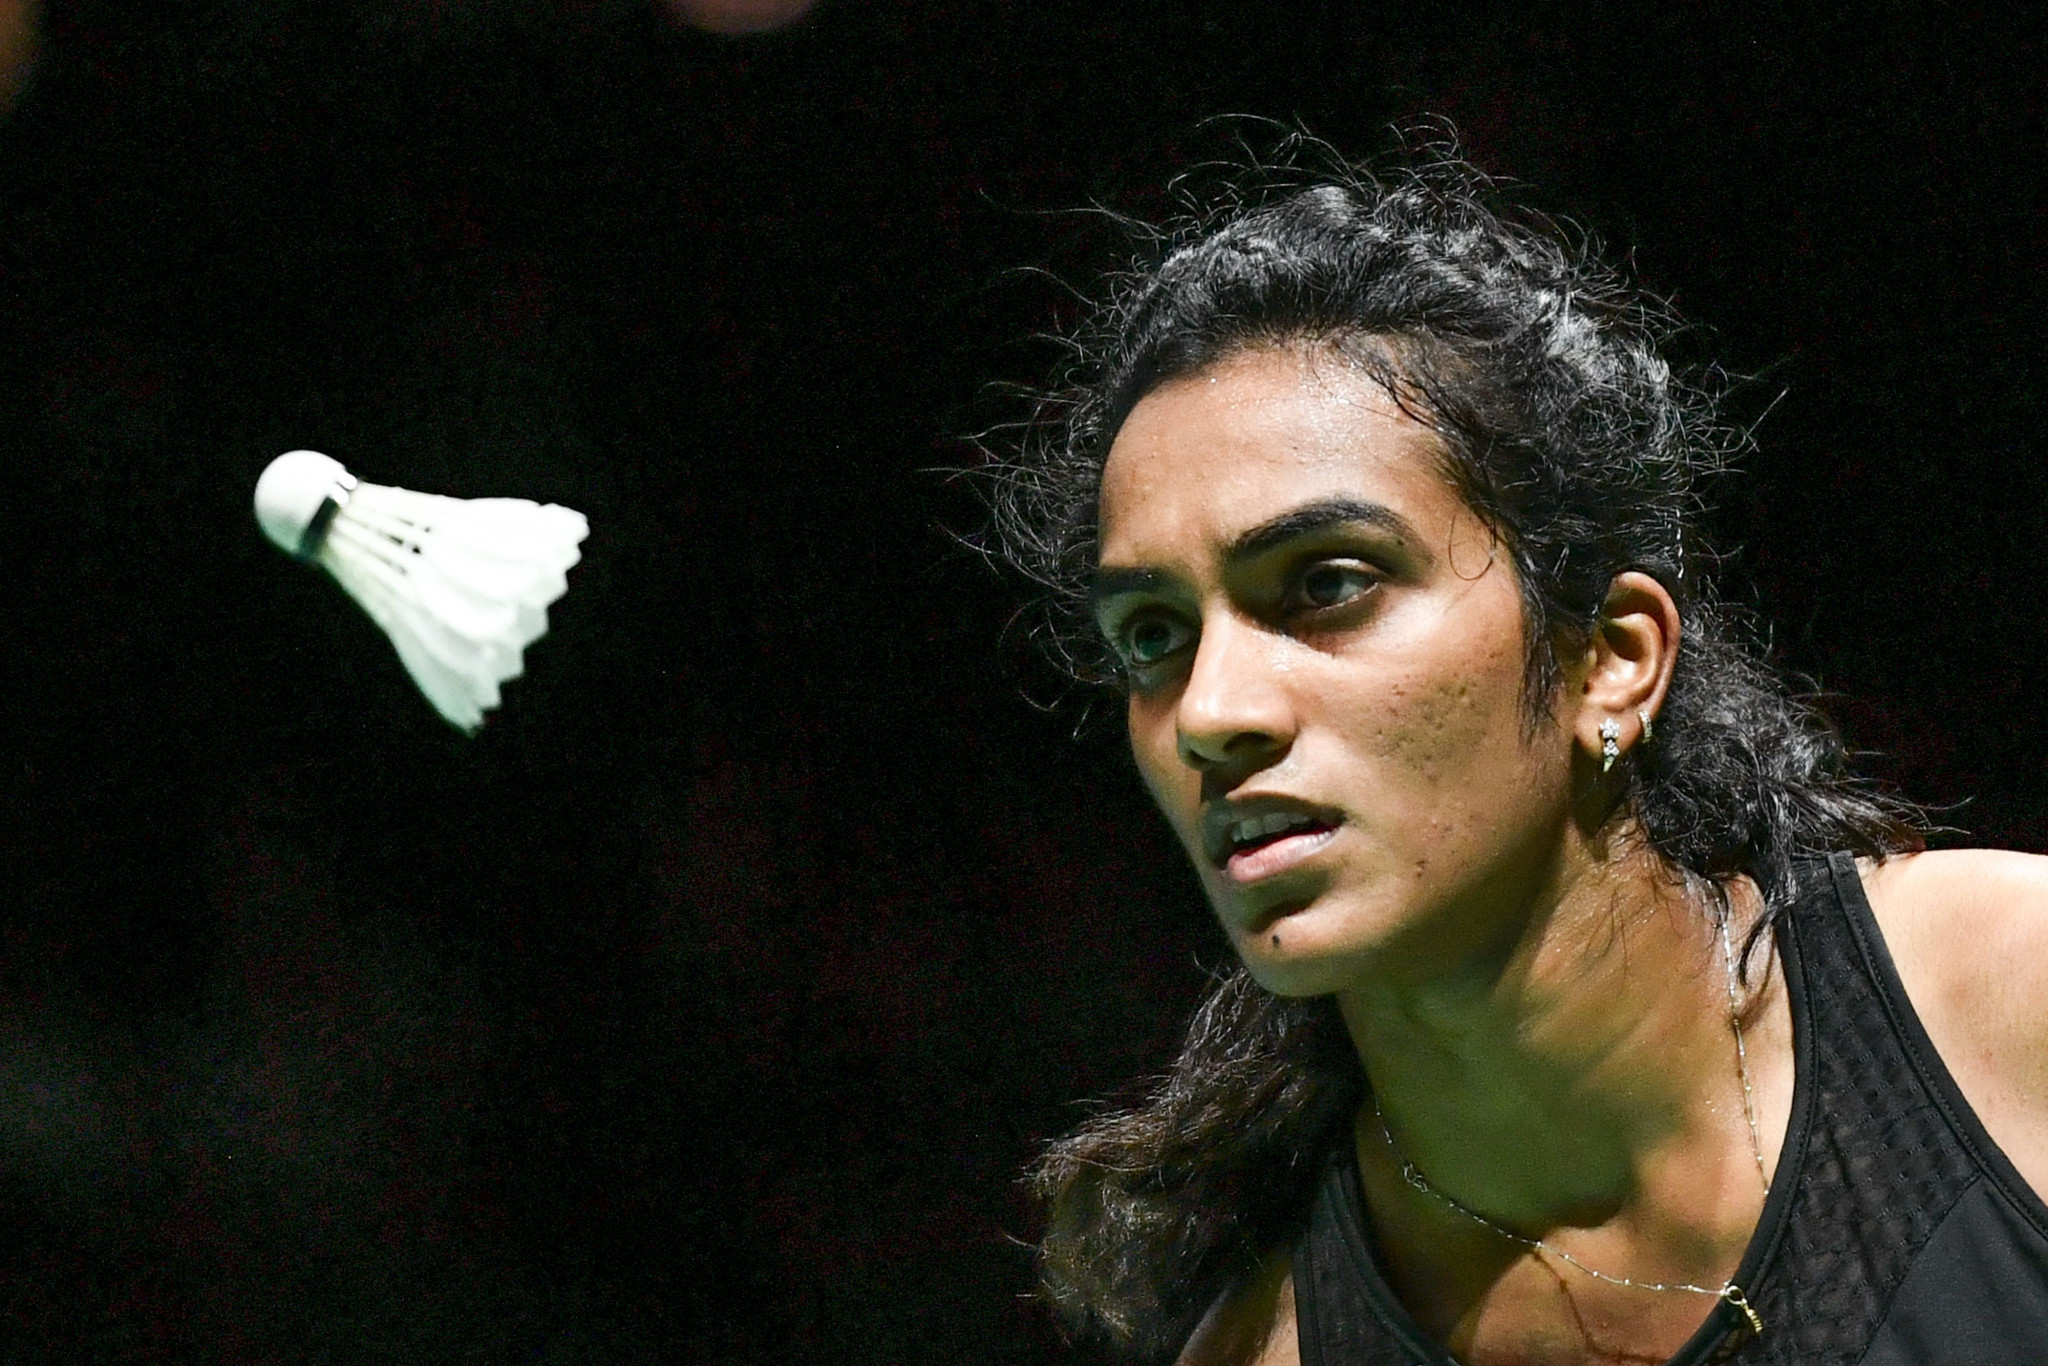 Indian shuttler PV Sindhu continued her good form after winning the World Championships  ©Getty Images